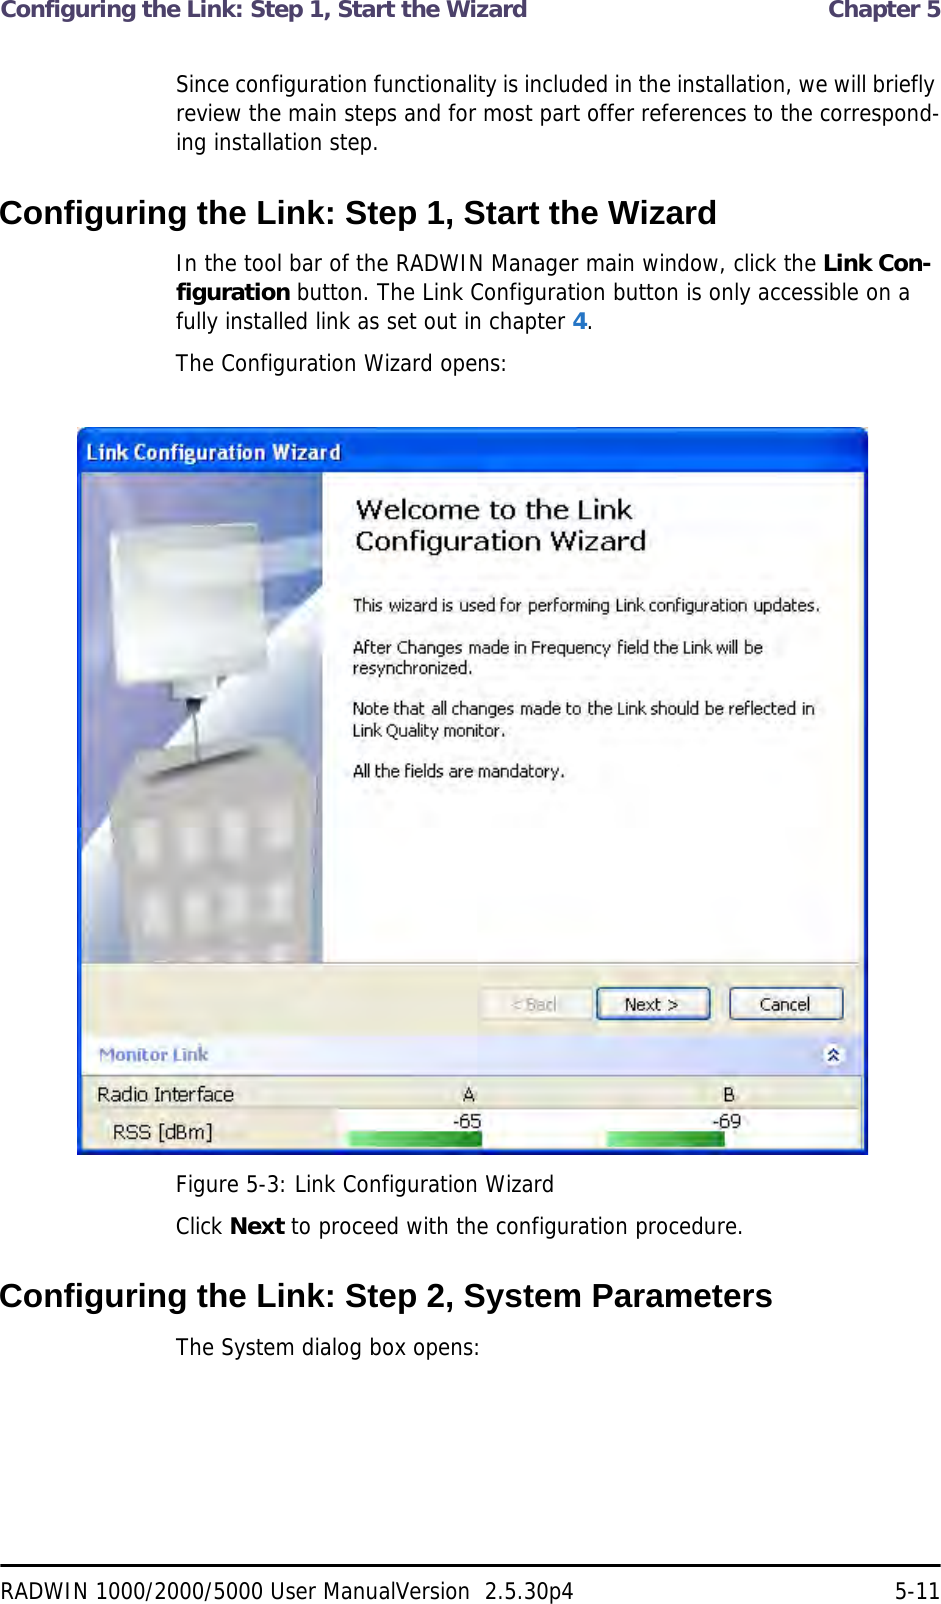 Configuring the Link: Step 1, Start the Wizard  Chapter 5RADWIN 1000/2000/5000 User ManualVersion  2.5.30p4 5-11Since configuration functionality is included in the installation, we will briefly review the main steps and for most part offer references to the correspond-ing installation step.Configuring the Link: Step 1, Start the WizardIn the tool bar of the RADWIN Manager main window, click the Link Con-figuration button. The Link Configuration button is only accessible on a fully installed link as set out in chapter 4.The Configuration Wizard opens:Figure 5-3: Link Configuration WizardClick Next to proceed with the configuration procedure.Configuring the Link: Step 2, System ParametersThe System dialog box opens: